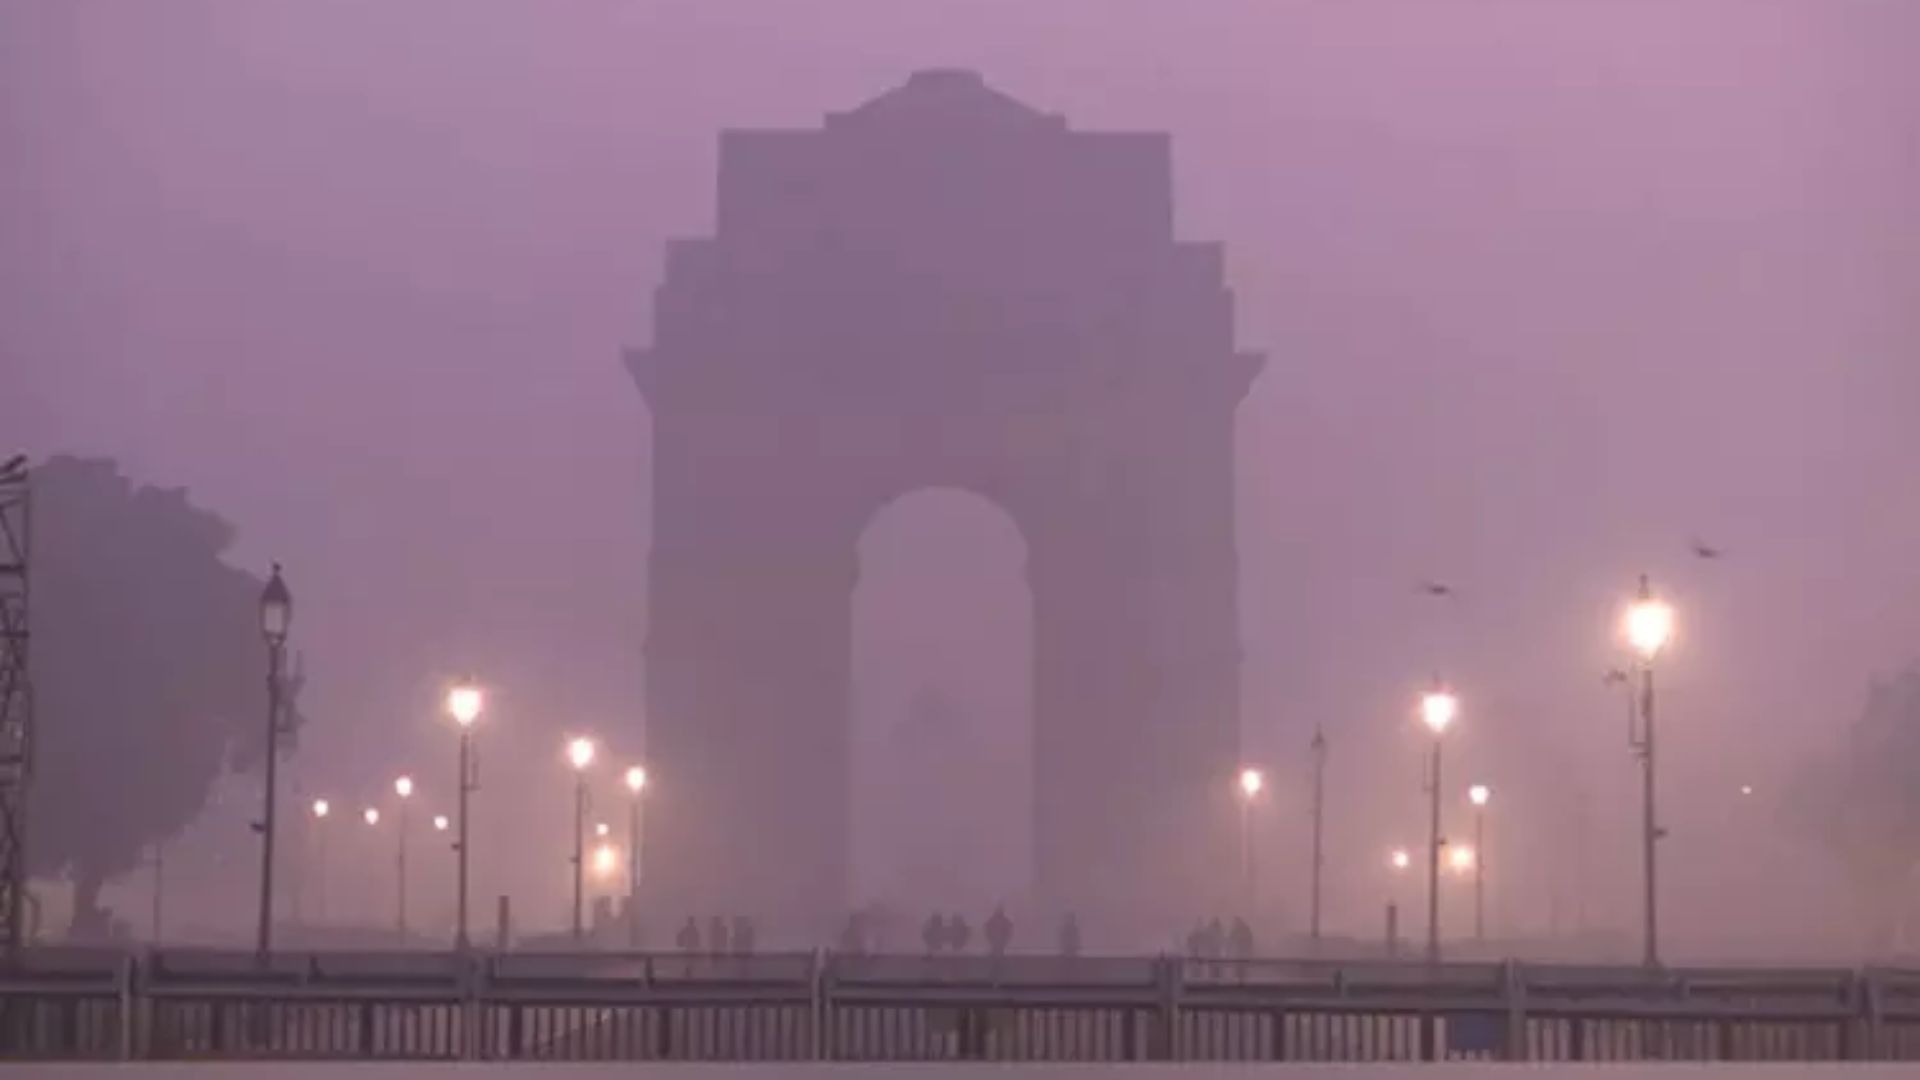 Delhi wakes up to dense fog, poor visibility casuses disruption in traffic